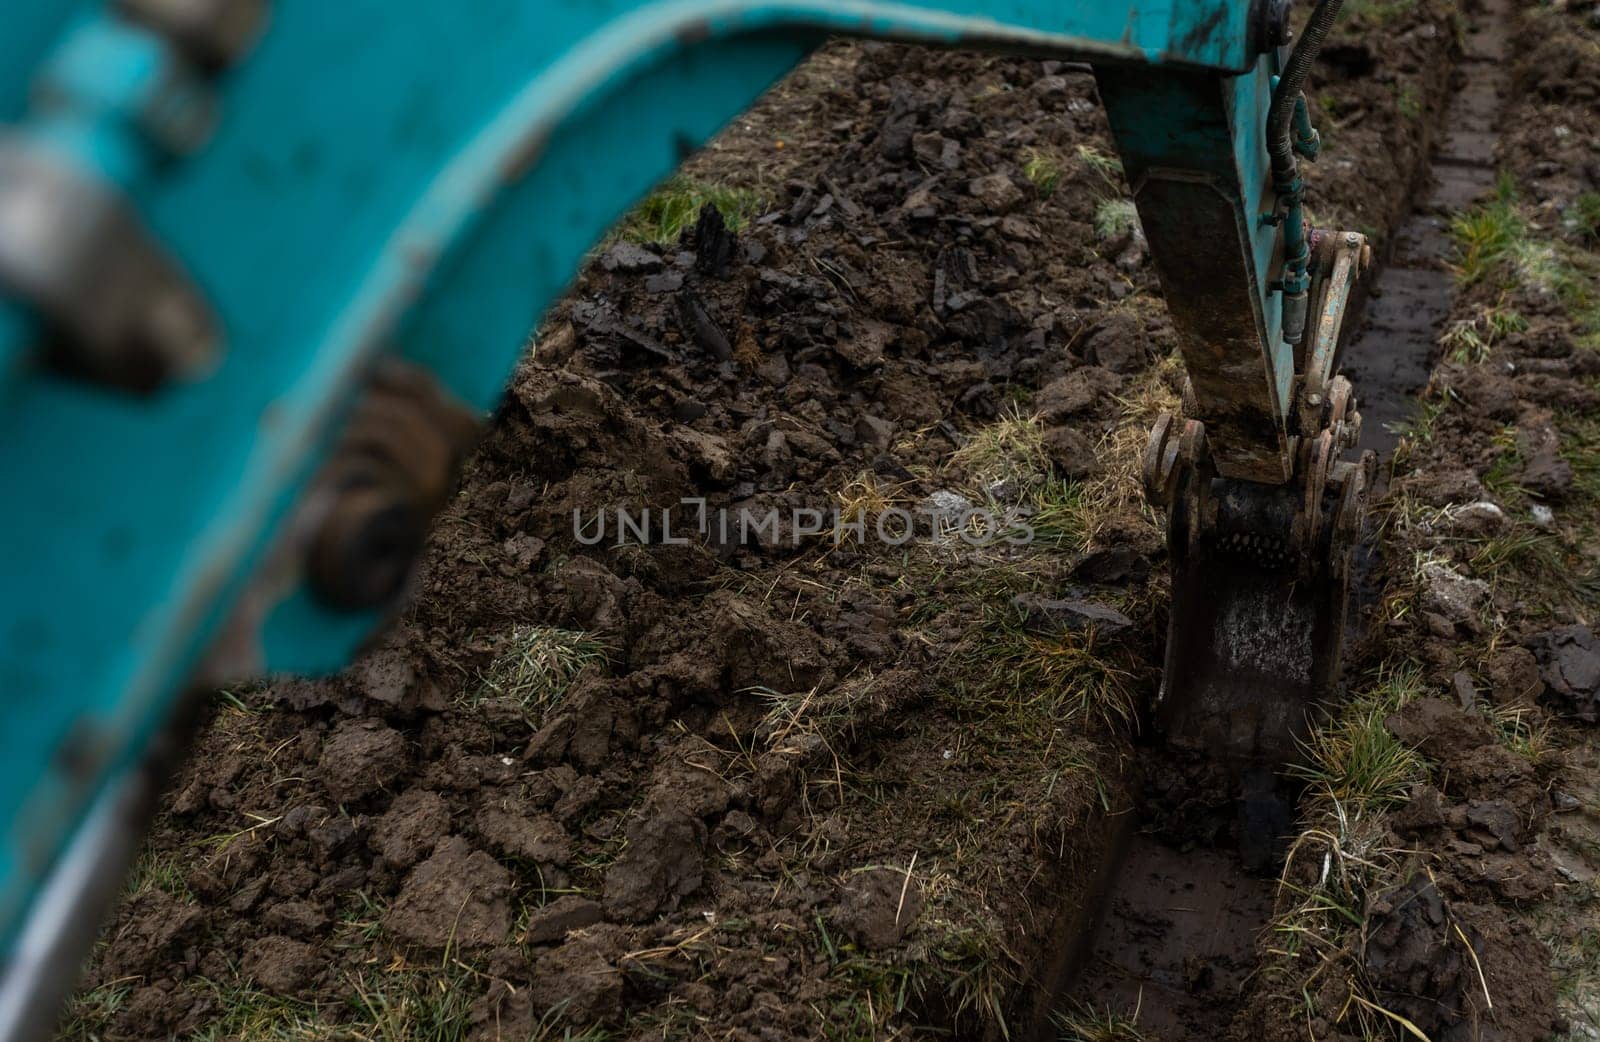 Close up of excavator or digger digging some soil or clay, industrial concept